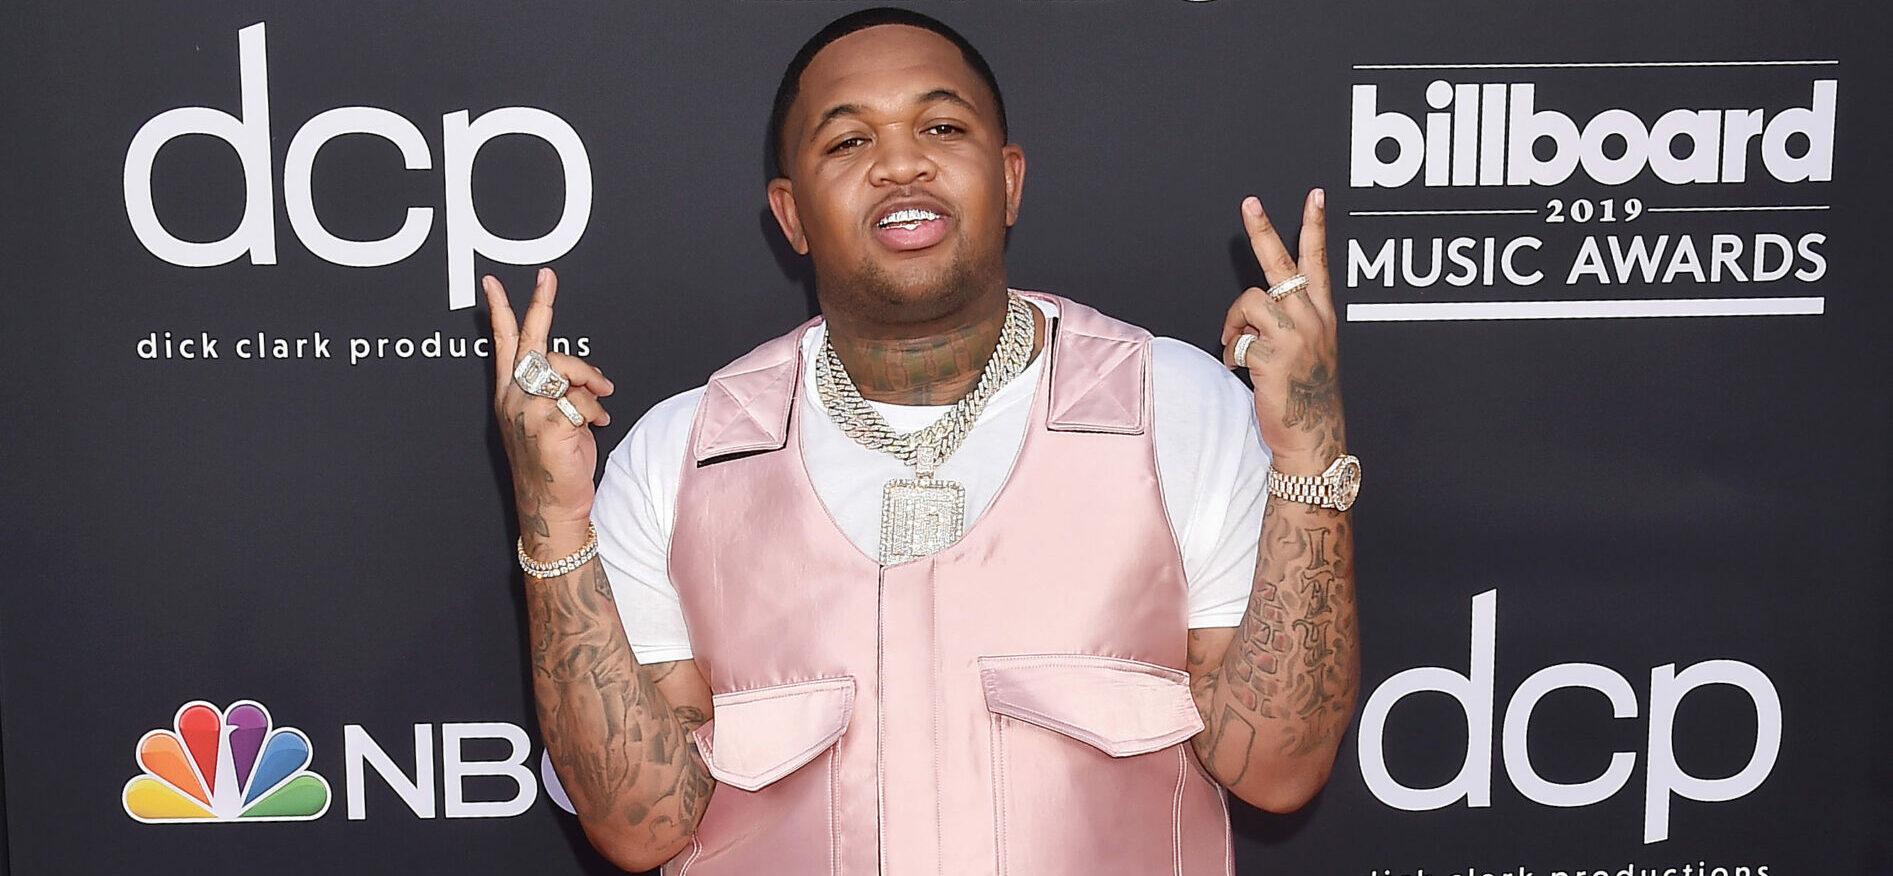 DJ Mustard To Ex-Wife: I Pay For Everything…Including Your Lambo! Now, Stop Harassing Me Online